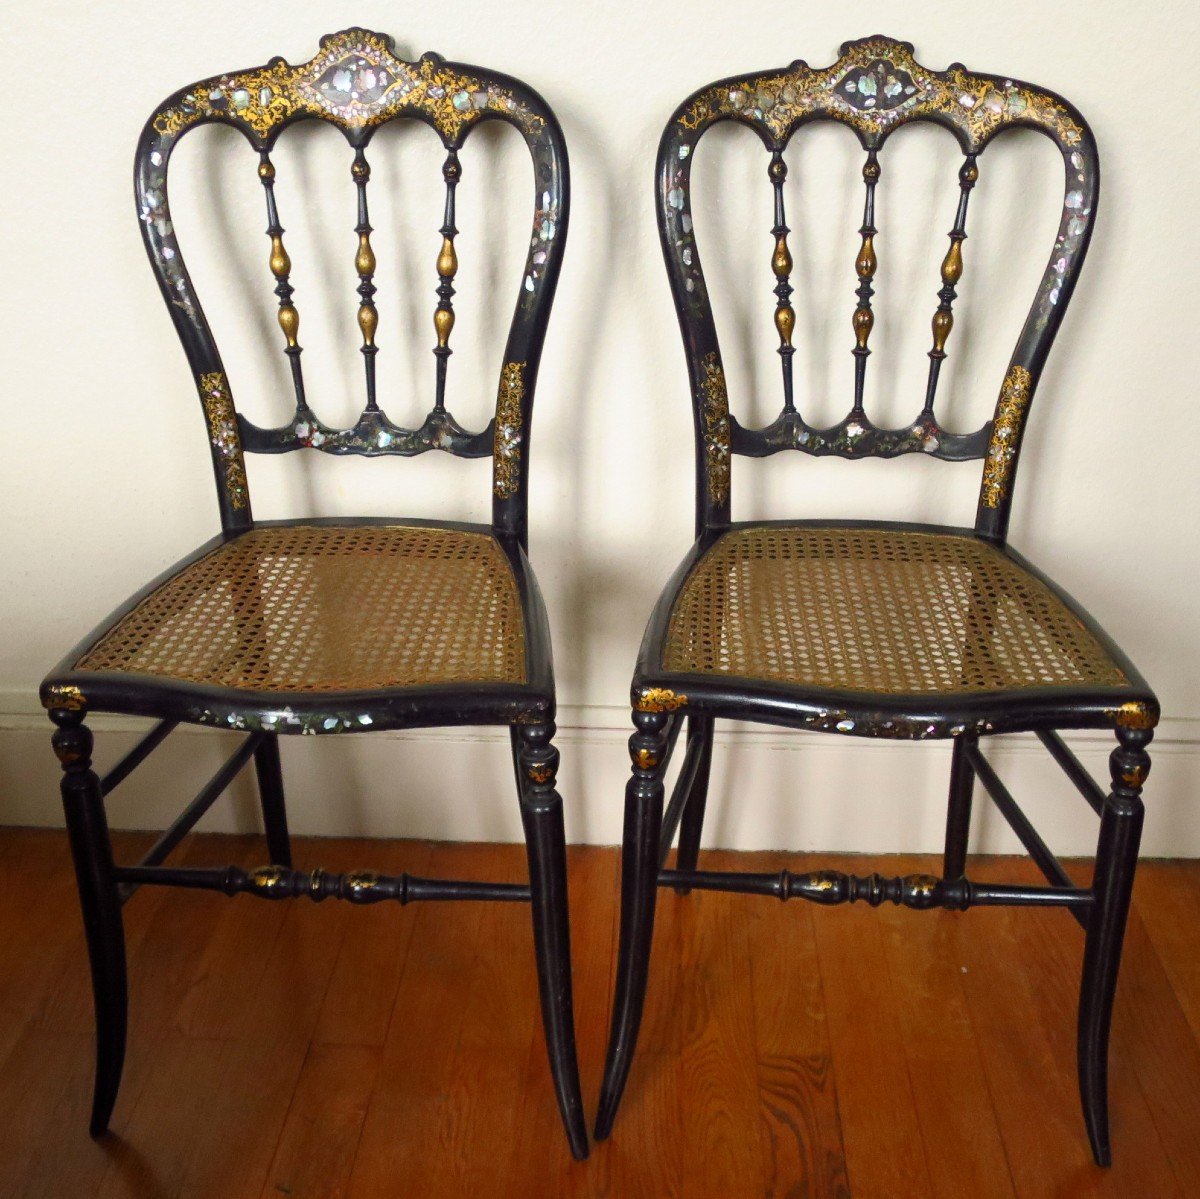 Pair Of Napoleon III Chairs, In Blackened Wood And Mother-of-pearl Inlays